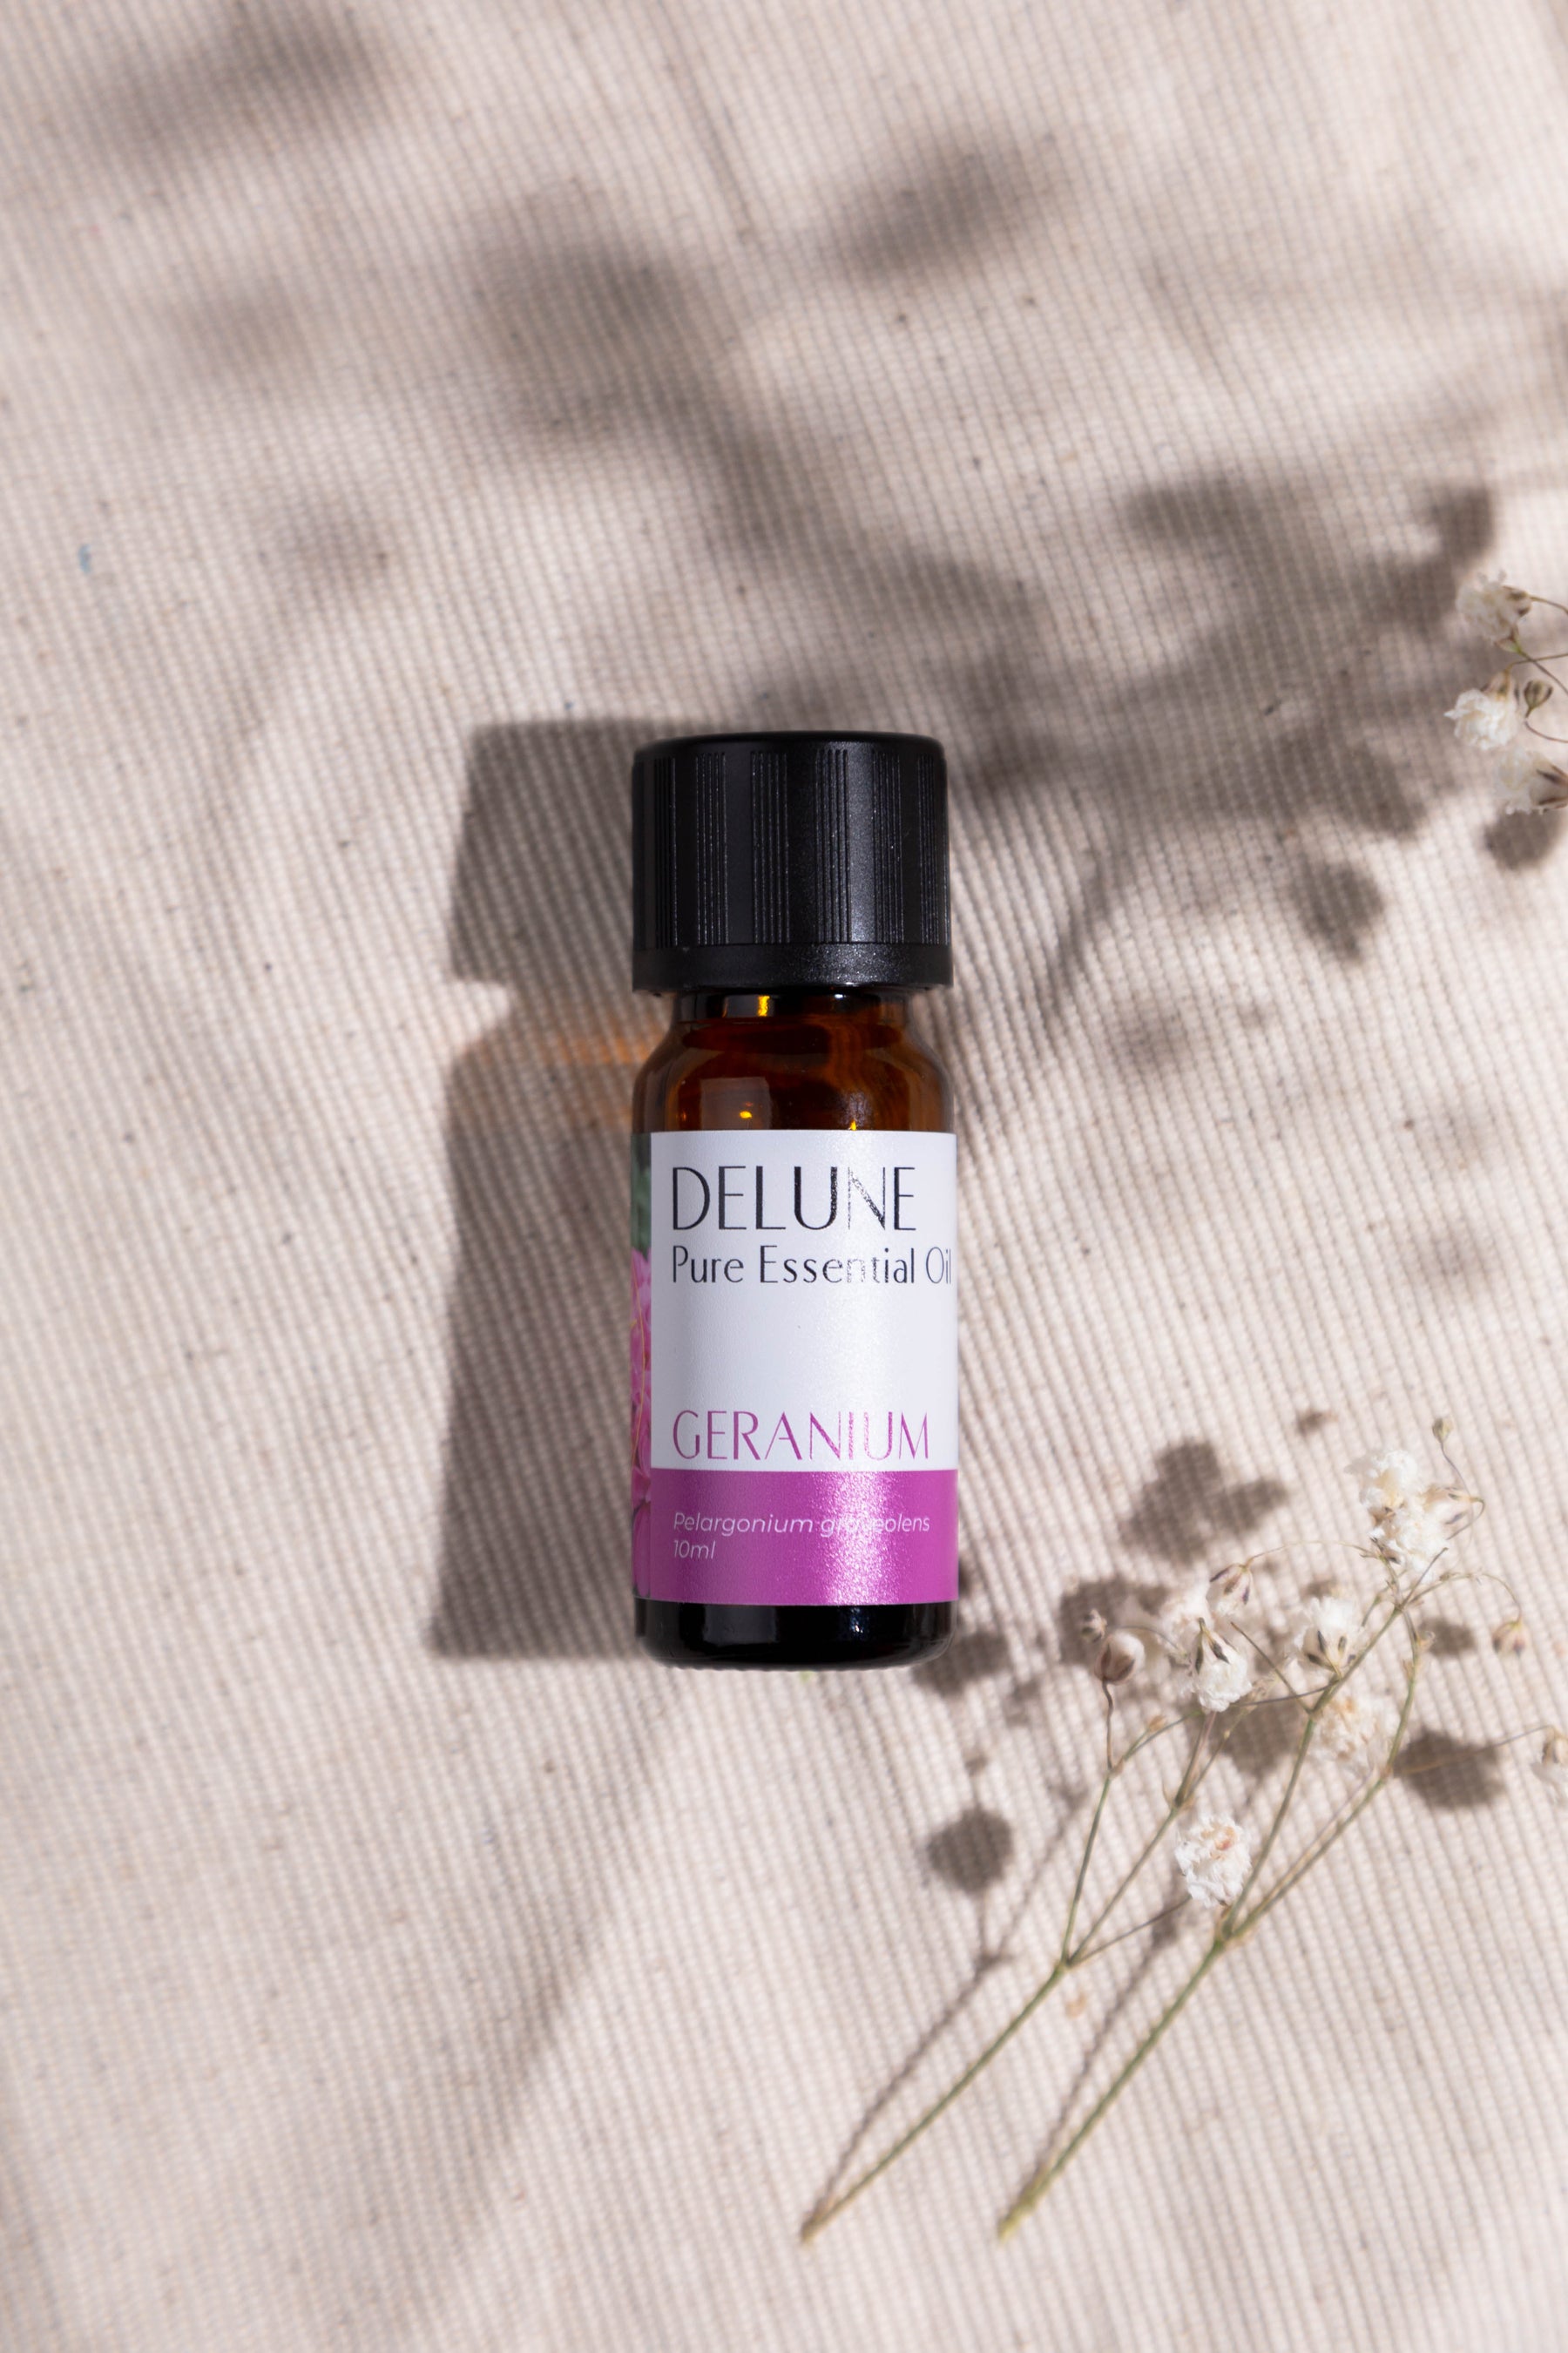 How Delune's Pure Essential Oils Can Help Improve Your Sleep